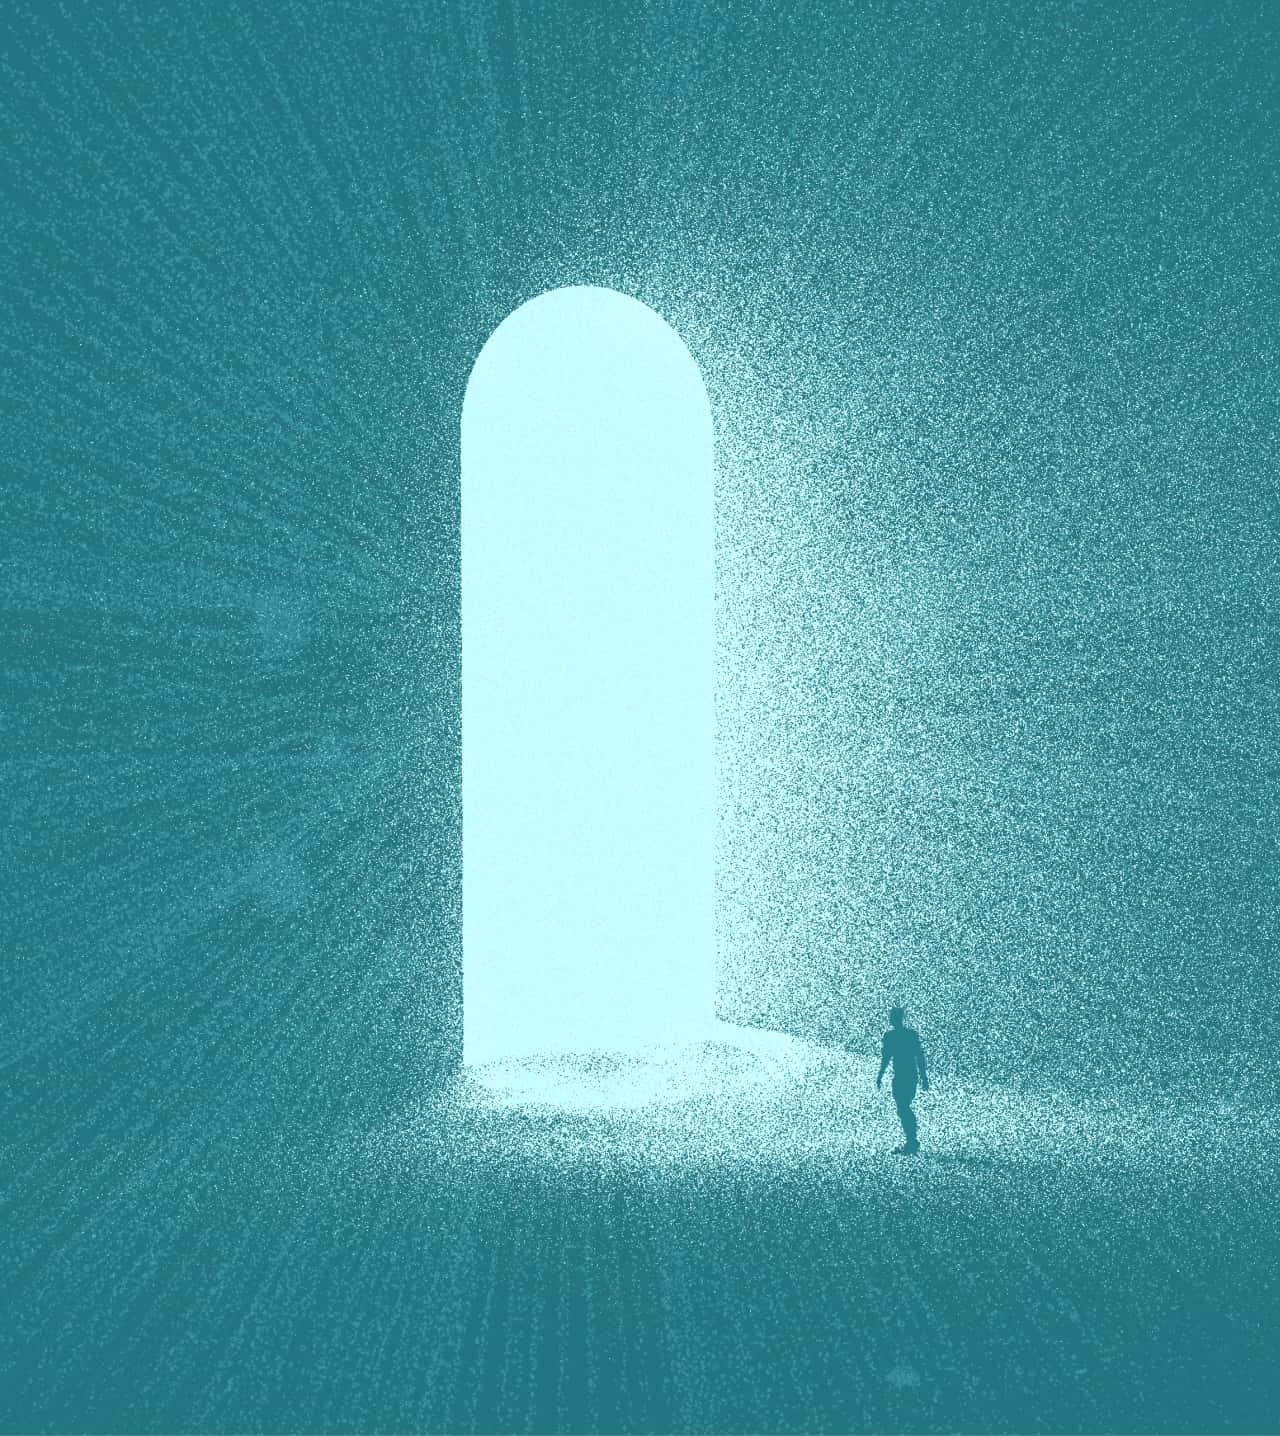 Light at the end of the tunnel with a person walking through